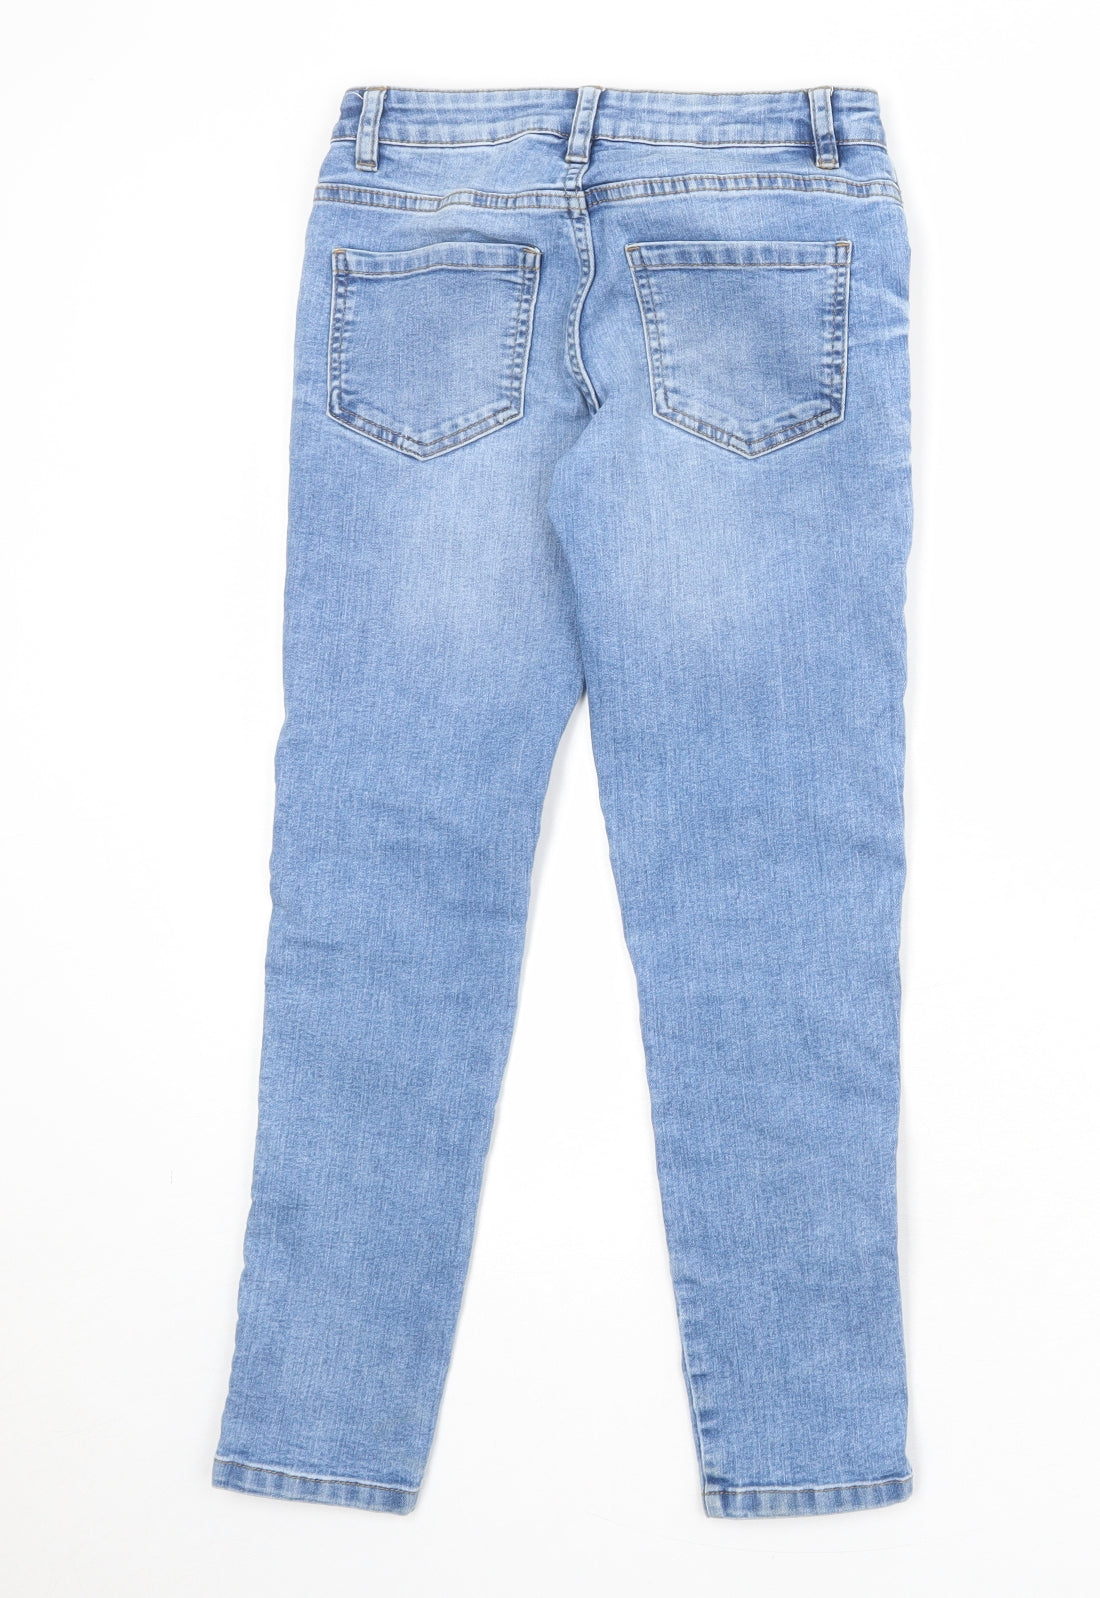 Marks and Spencer Girls Blue Cotton Skinny Jeans Size 10-11 Years Regular Zip